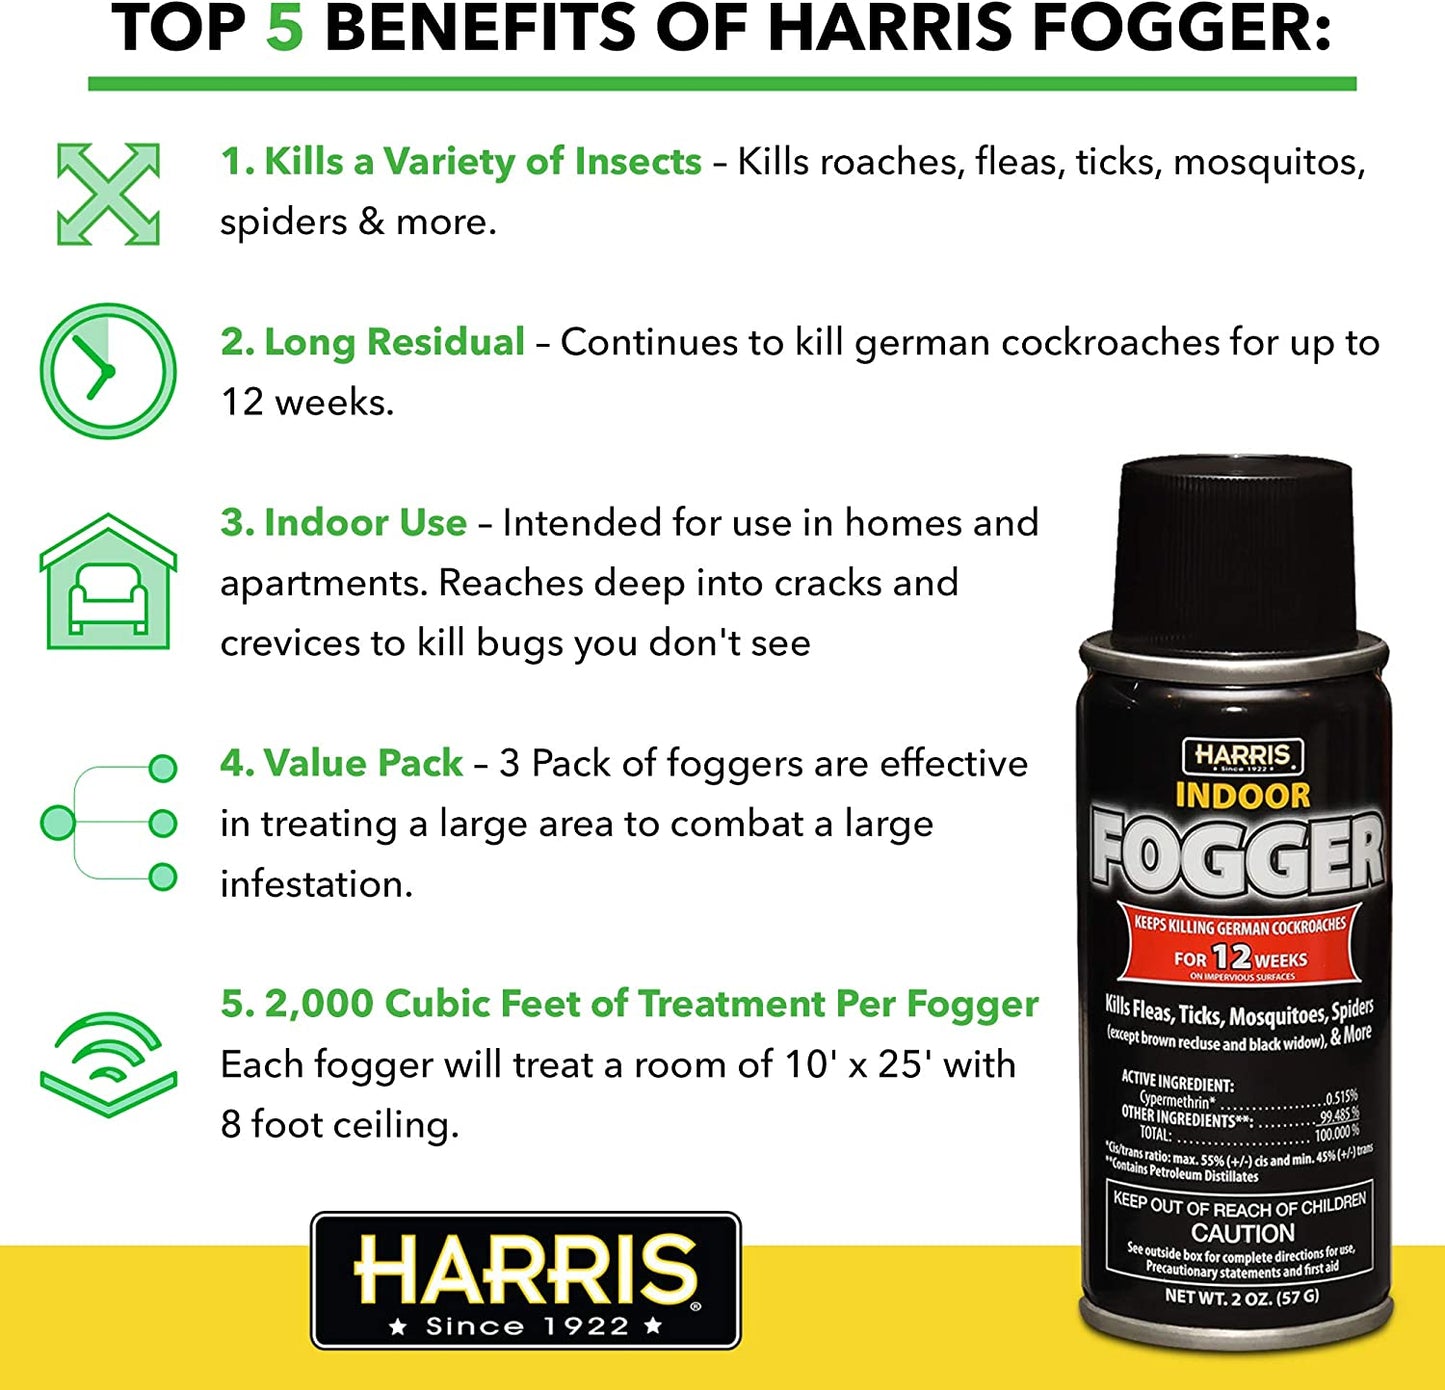 Harris, 12 Week Indoor Insect Fogger, 3 Pack, for Roaches, Fleas, Ticks, Mosquitos, Spiders and More